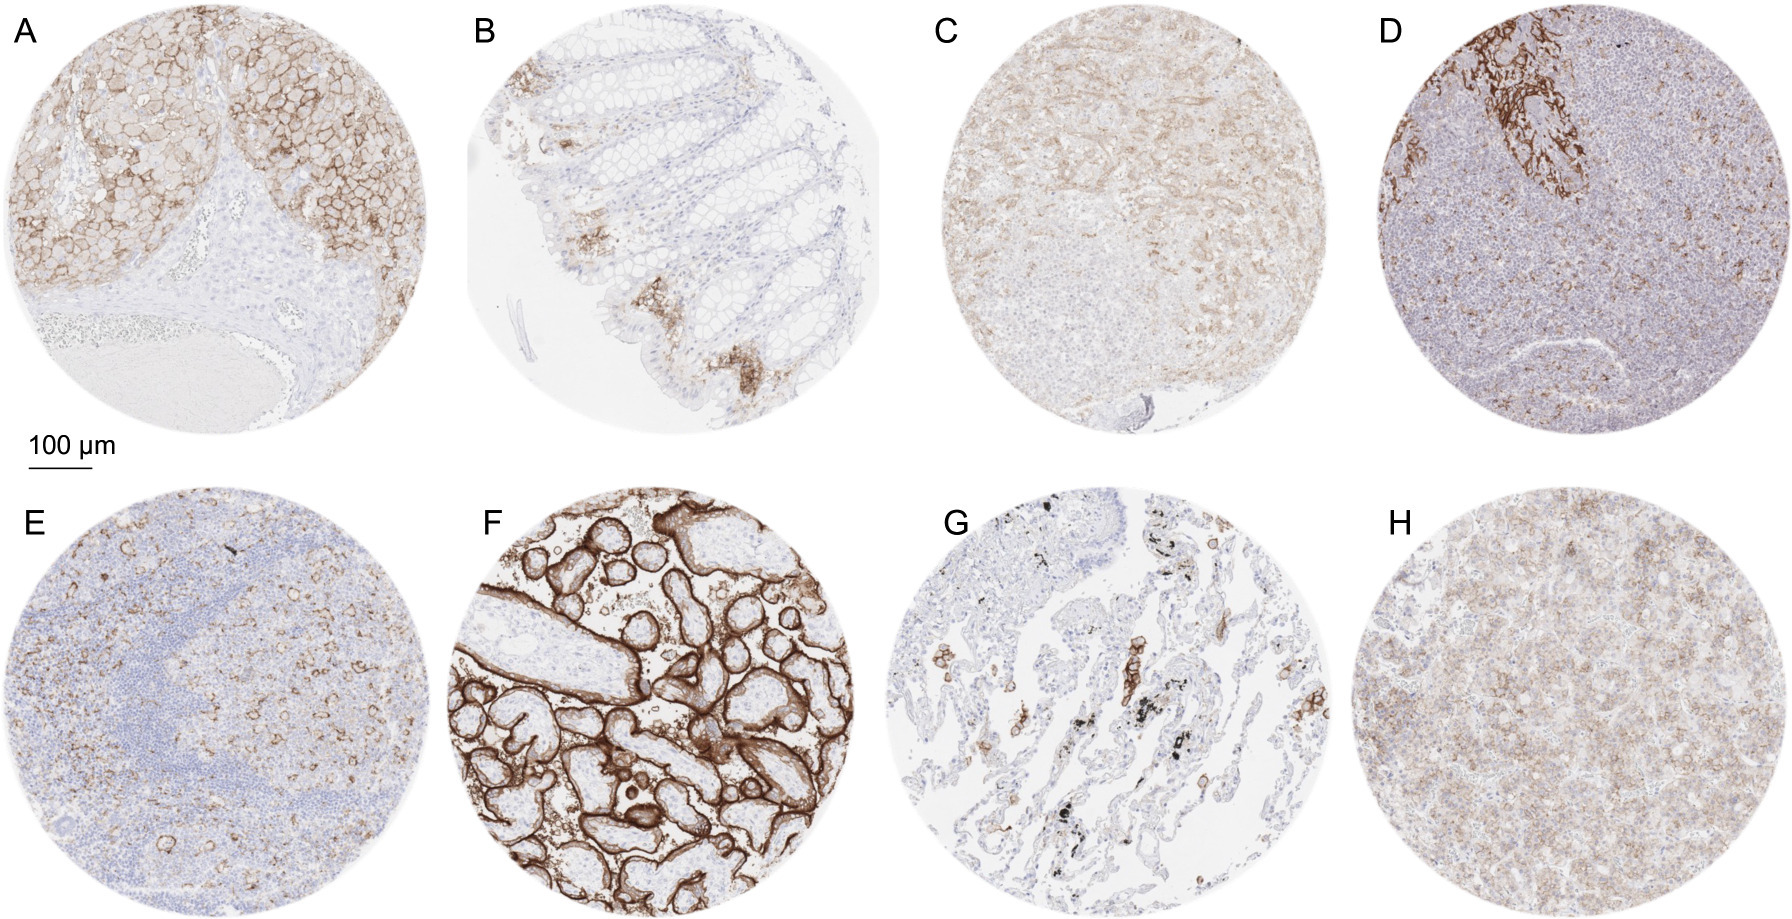 PD-L1 immunostaining of normal cells using MSVA-711R. The panels show a membranous PD-L1 positivity of Corpus luteum cells in the ovary (A), macrophages in colon epithelium (B), small (littoral) blood vessels in the spleen (C), a fraction of crypt epithelial cells and macrophages of the tonsil (D), dendritic cells and macrophages in a lymph node (E), surface membranes of the syncytiotrophoblast in the placenta (F), alveolar macrophages in the lung (G) and of a fraction of epithelial cells in the adenohypophysis.